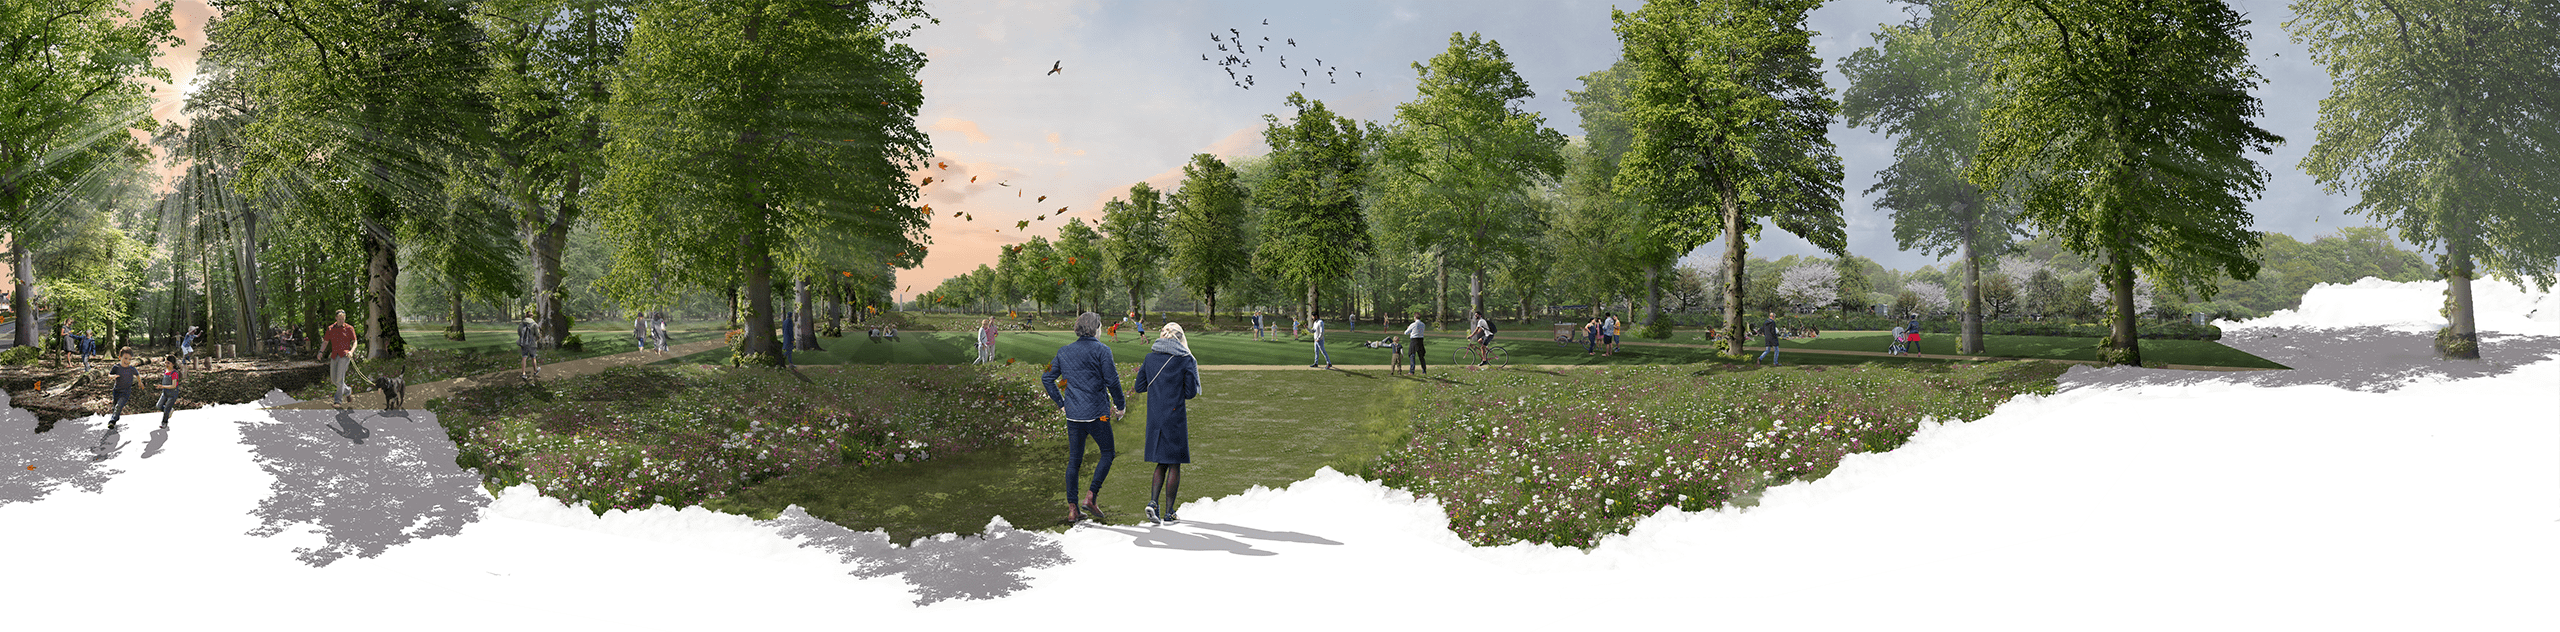 A photomontage of the proposed development at Abbey Barn, set against existing mature woodlands and open parklands. © BMD